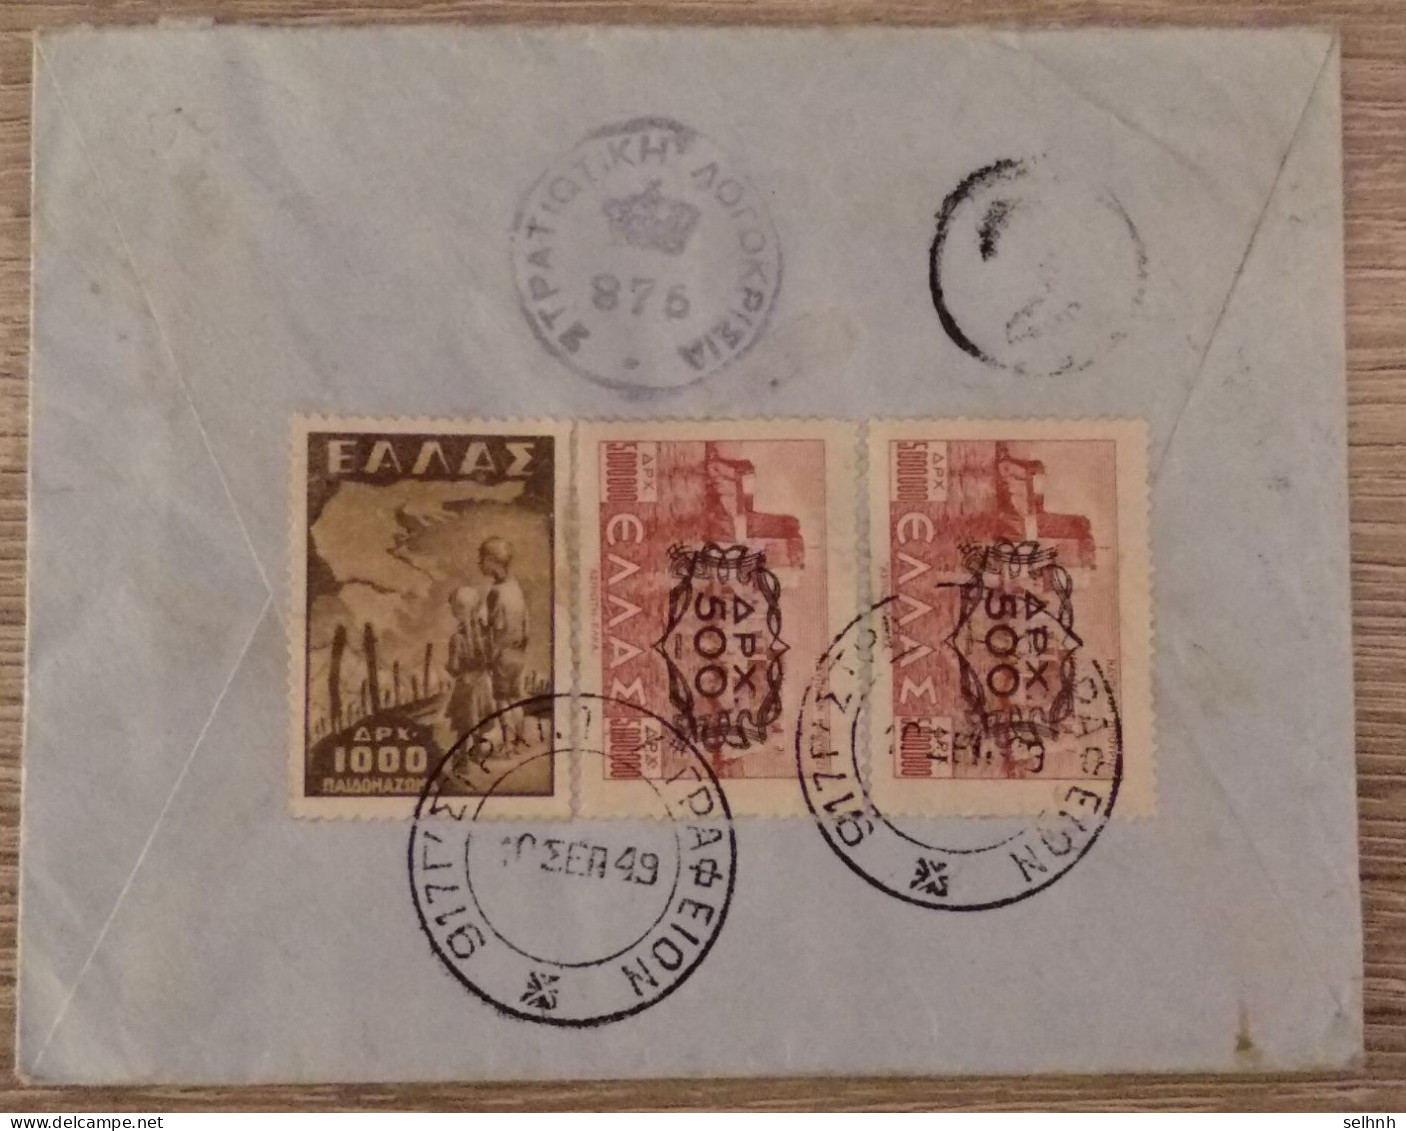 GREECE GRECE COVER TO FRANCE WITH ARMY GENSOR 876. THE STAMPS WERE CANCELED WITH "917 STRAT GRAFEION" - Storia Postale